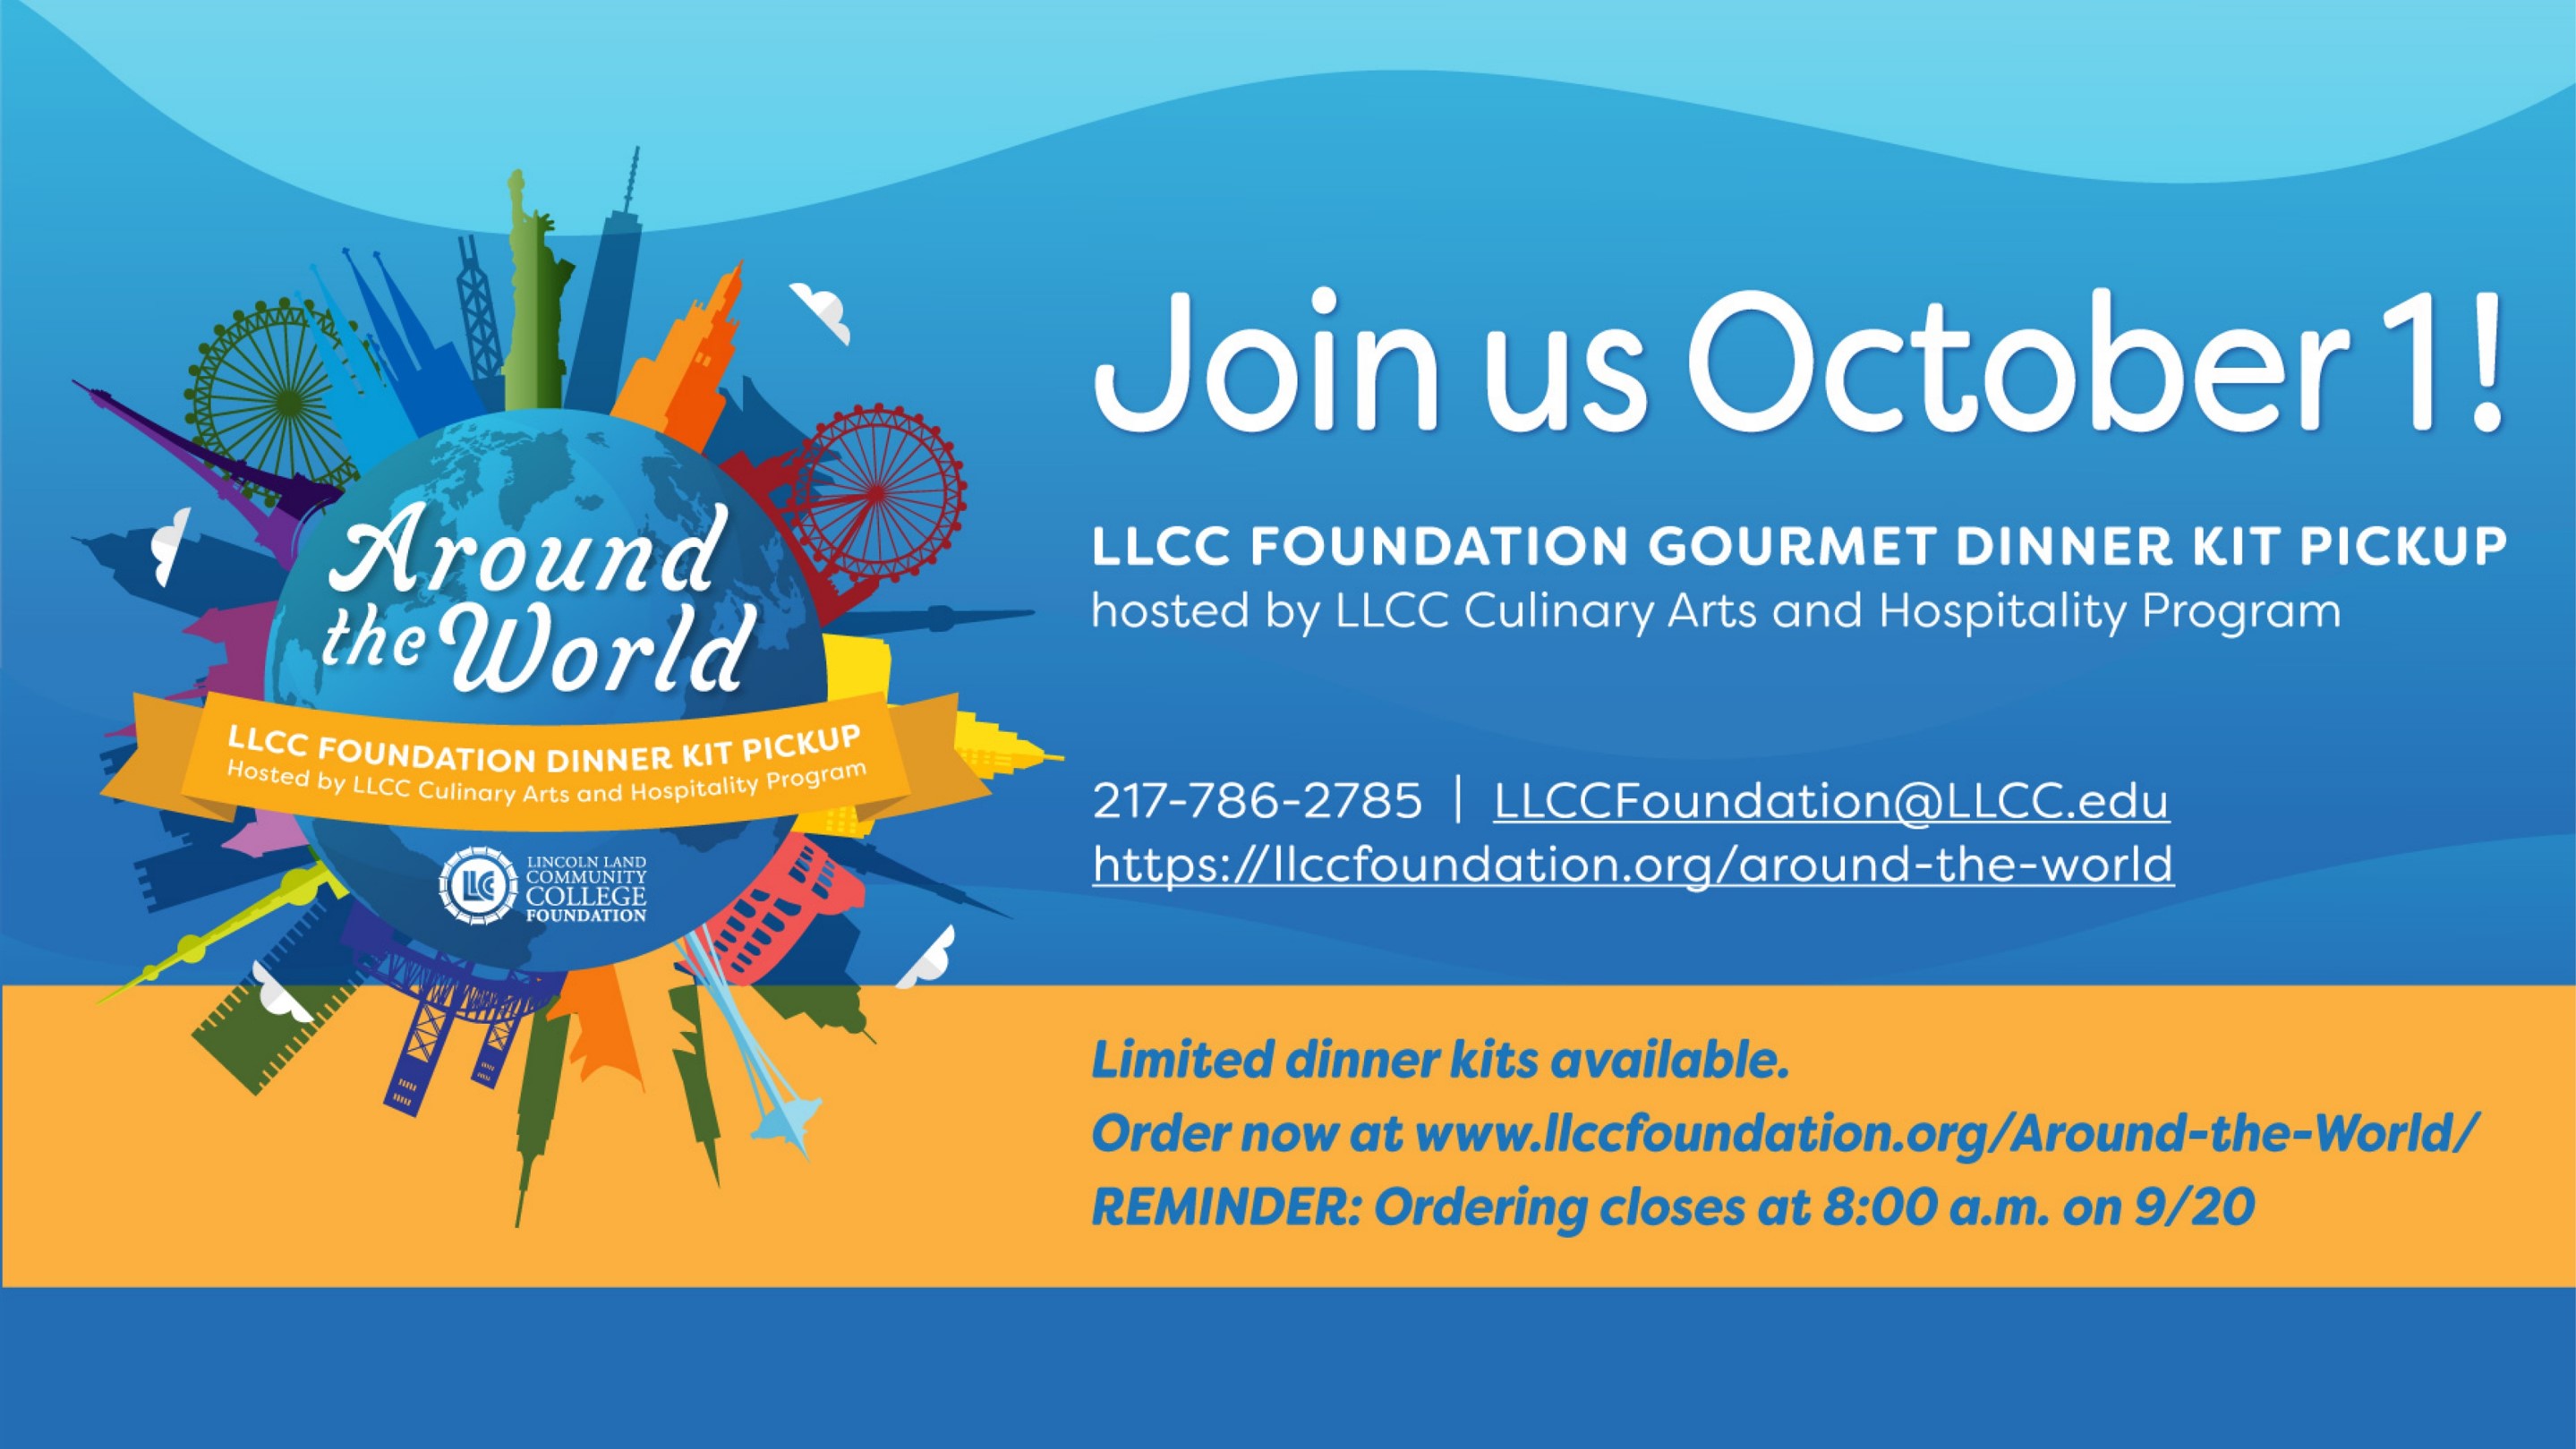 Around the World LLCC Foundation Dinner Kit Pickup hosted by LLCC Culinary Arts and Hospitality Program. Join us October 1! 217-786-2785. LLCCFoundation@llcc.edu. https://llccfoundation.org/around-the-world. Limited dinner kits available. Order now at www..llccfoundation/org/Around-the-World/. Reminder: Ordering closes at 8:00 a.m. on 9/20.LLCC Lincoln Land Community College Foundation.